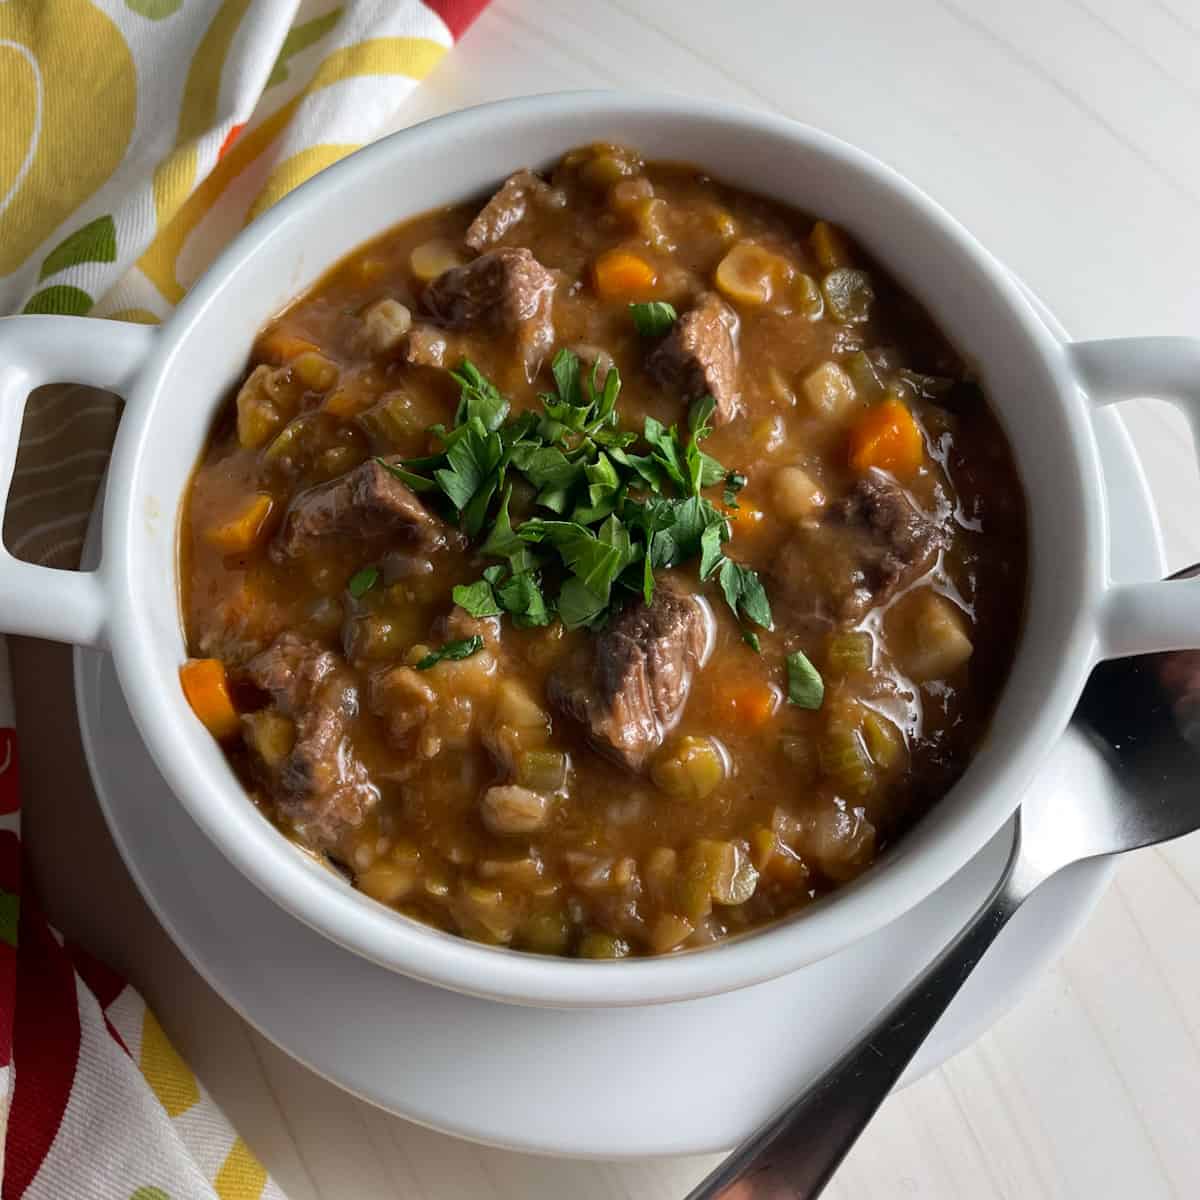 Beef barley and vegetable soup in a bowl topped with fresh herbs.